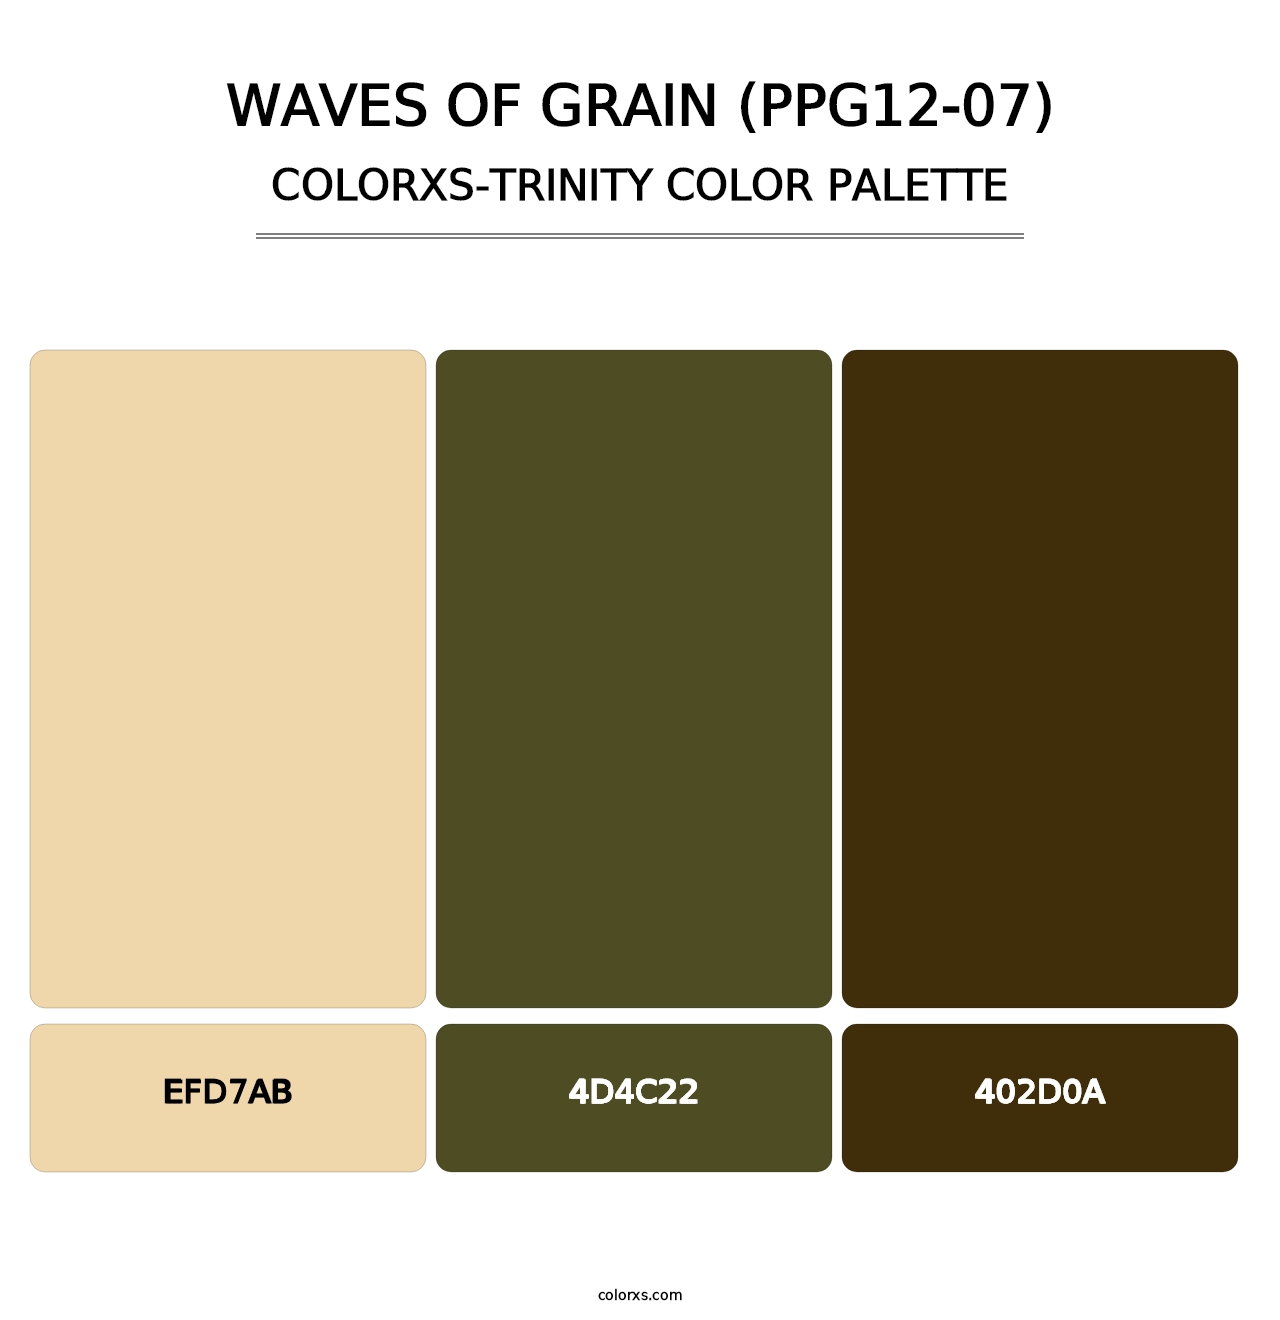 Waves Of Grain (PPG12-07) - Colorxs Trinity Palette